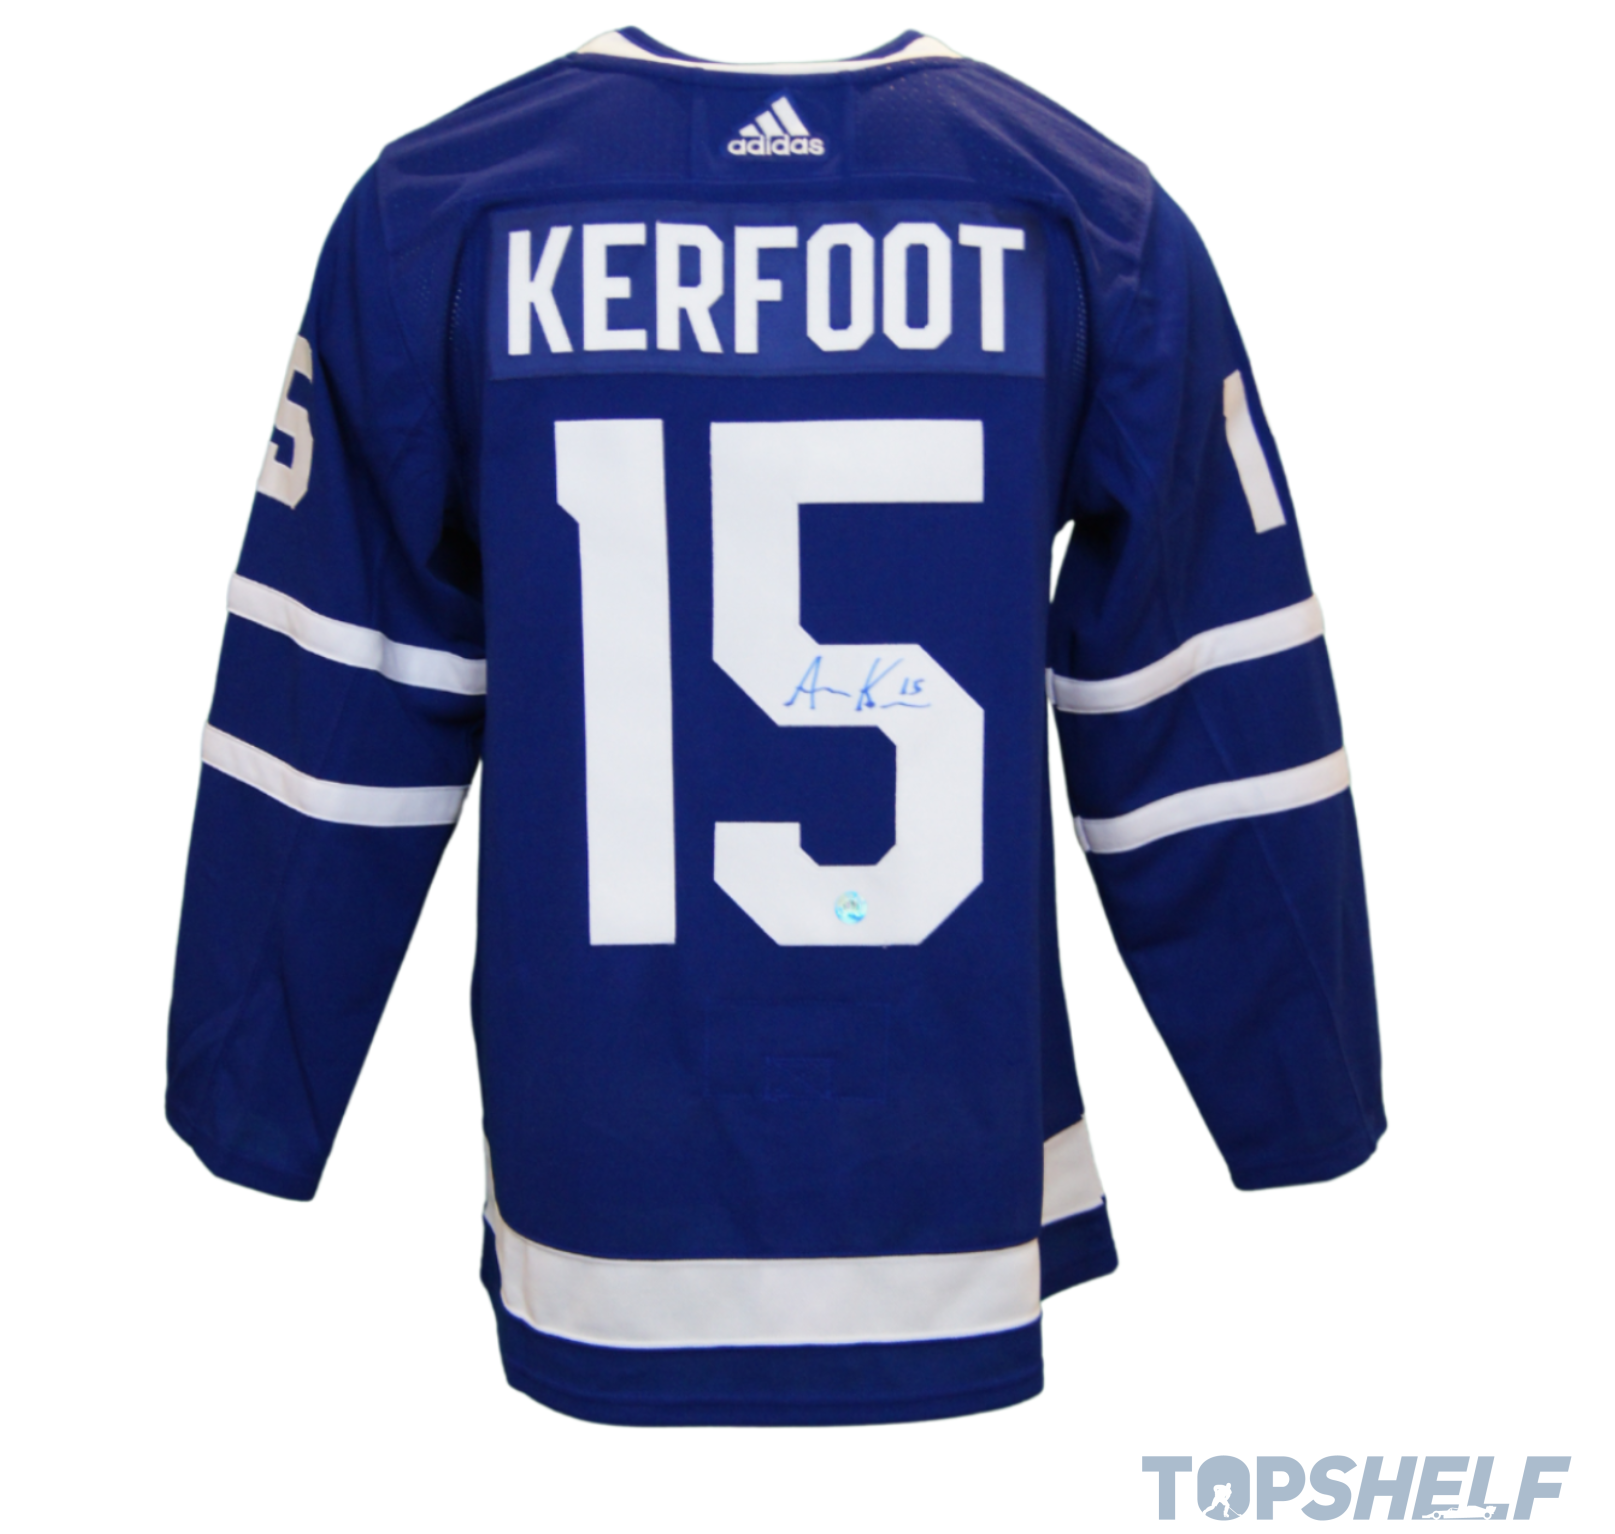 Alex Kerfoot Autographed Toronto Maple Leafs Home Jersey - Adidas Authentic